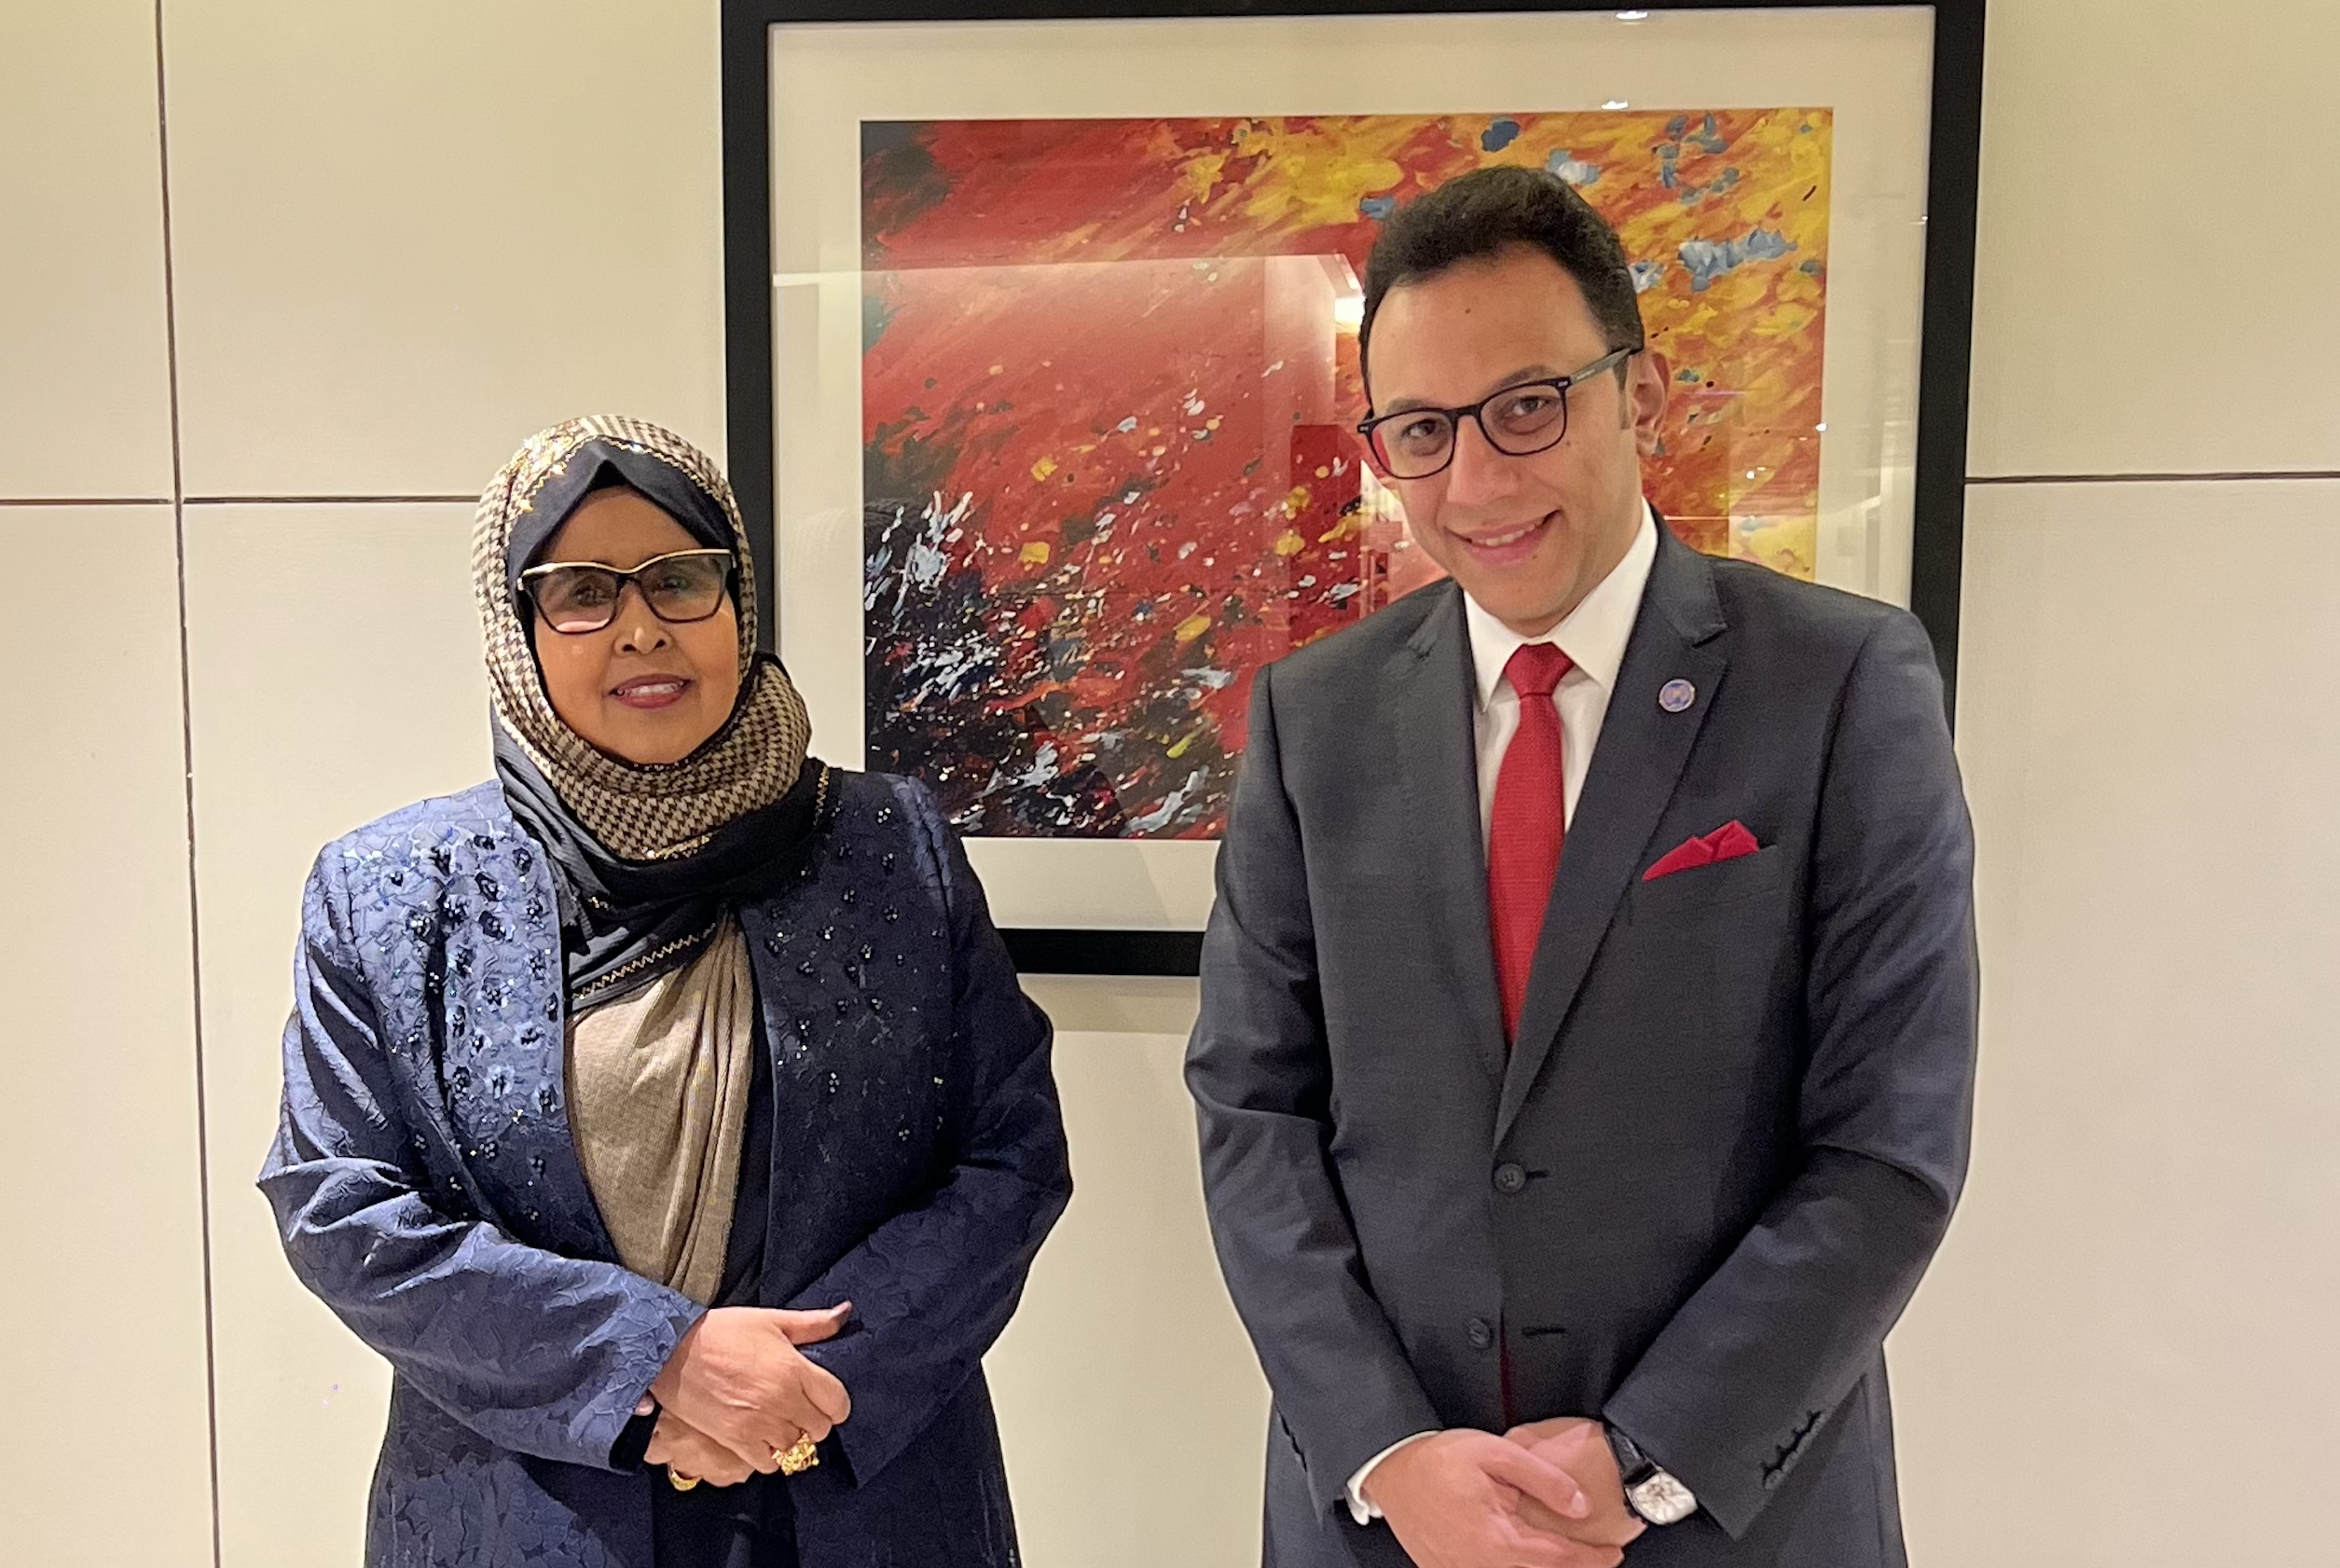 H.E. Zahara Omar Hassan First Lady of Somalia met H.E. Ekramy El Zaghat in Abu Dhabi to discuss the future cooperation in Somalia